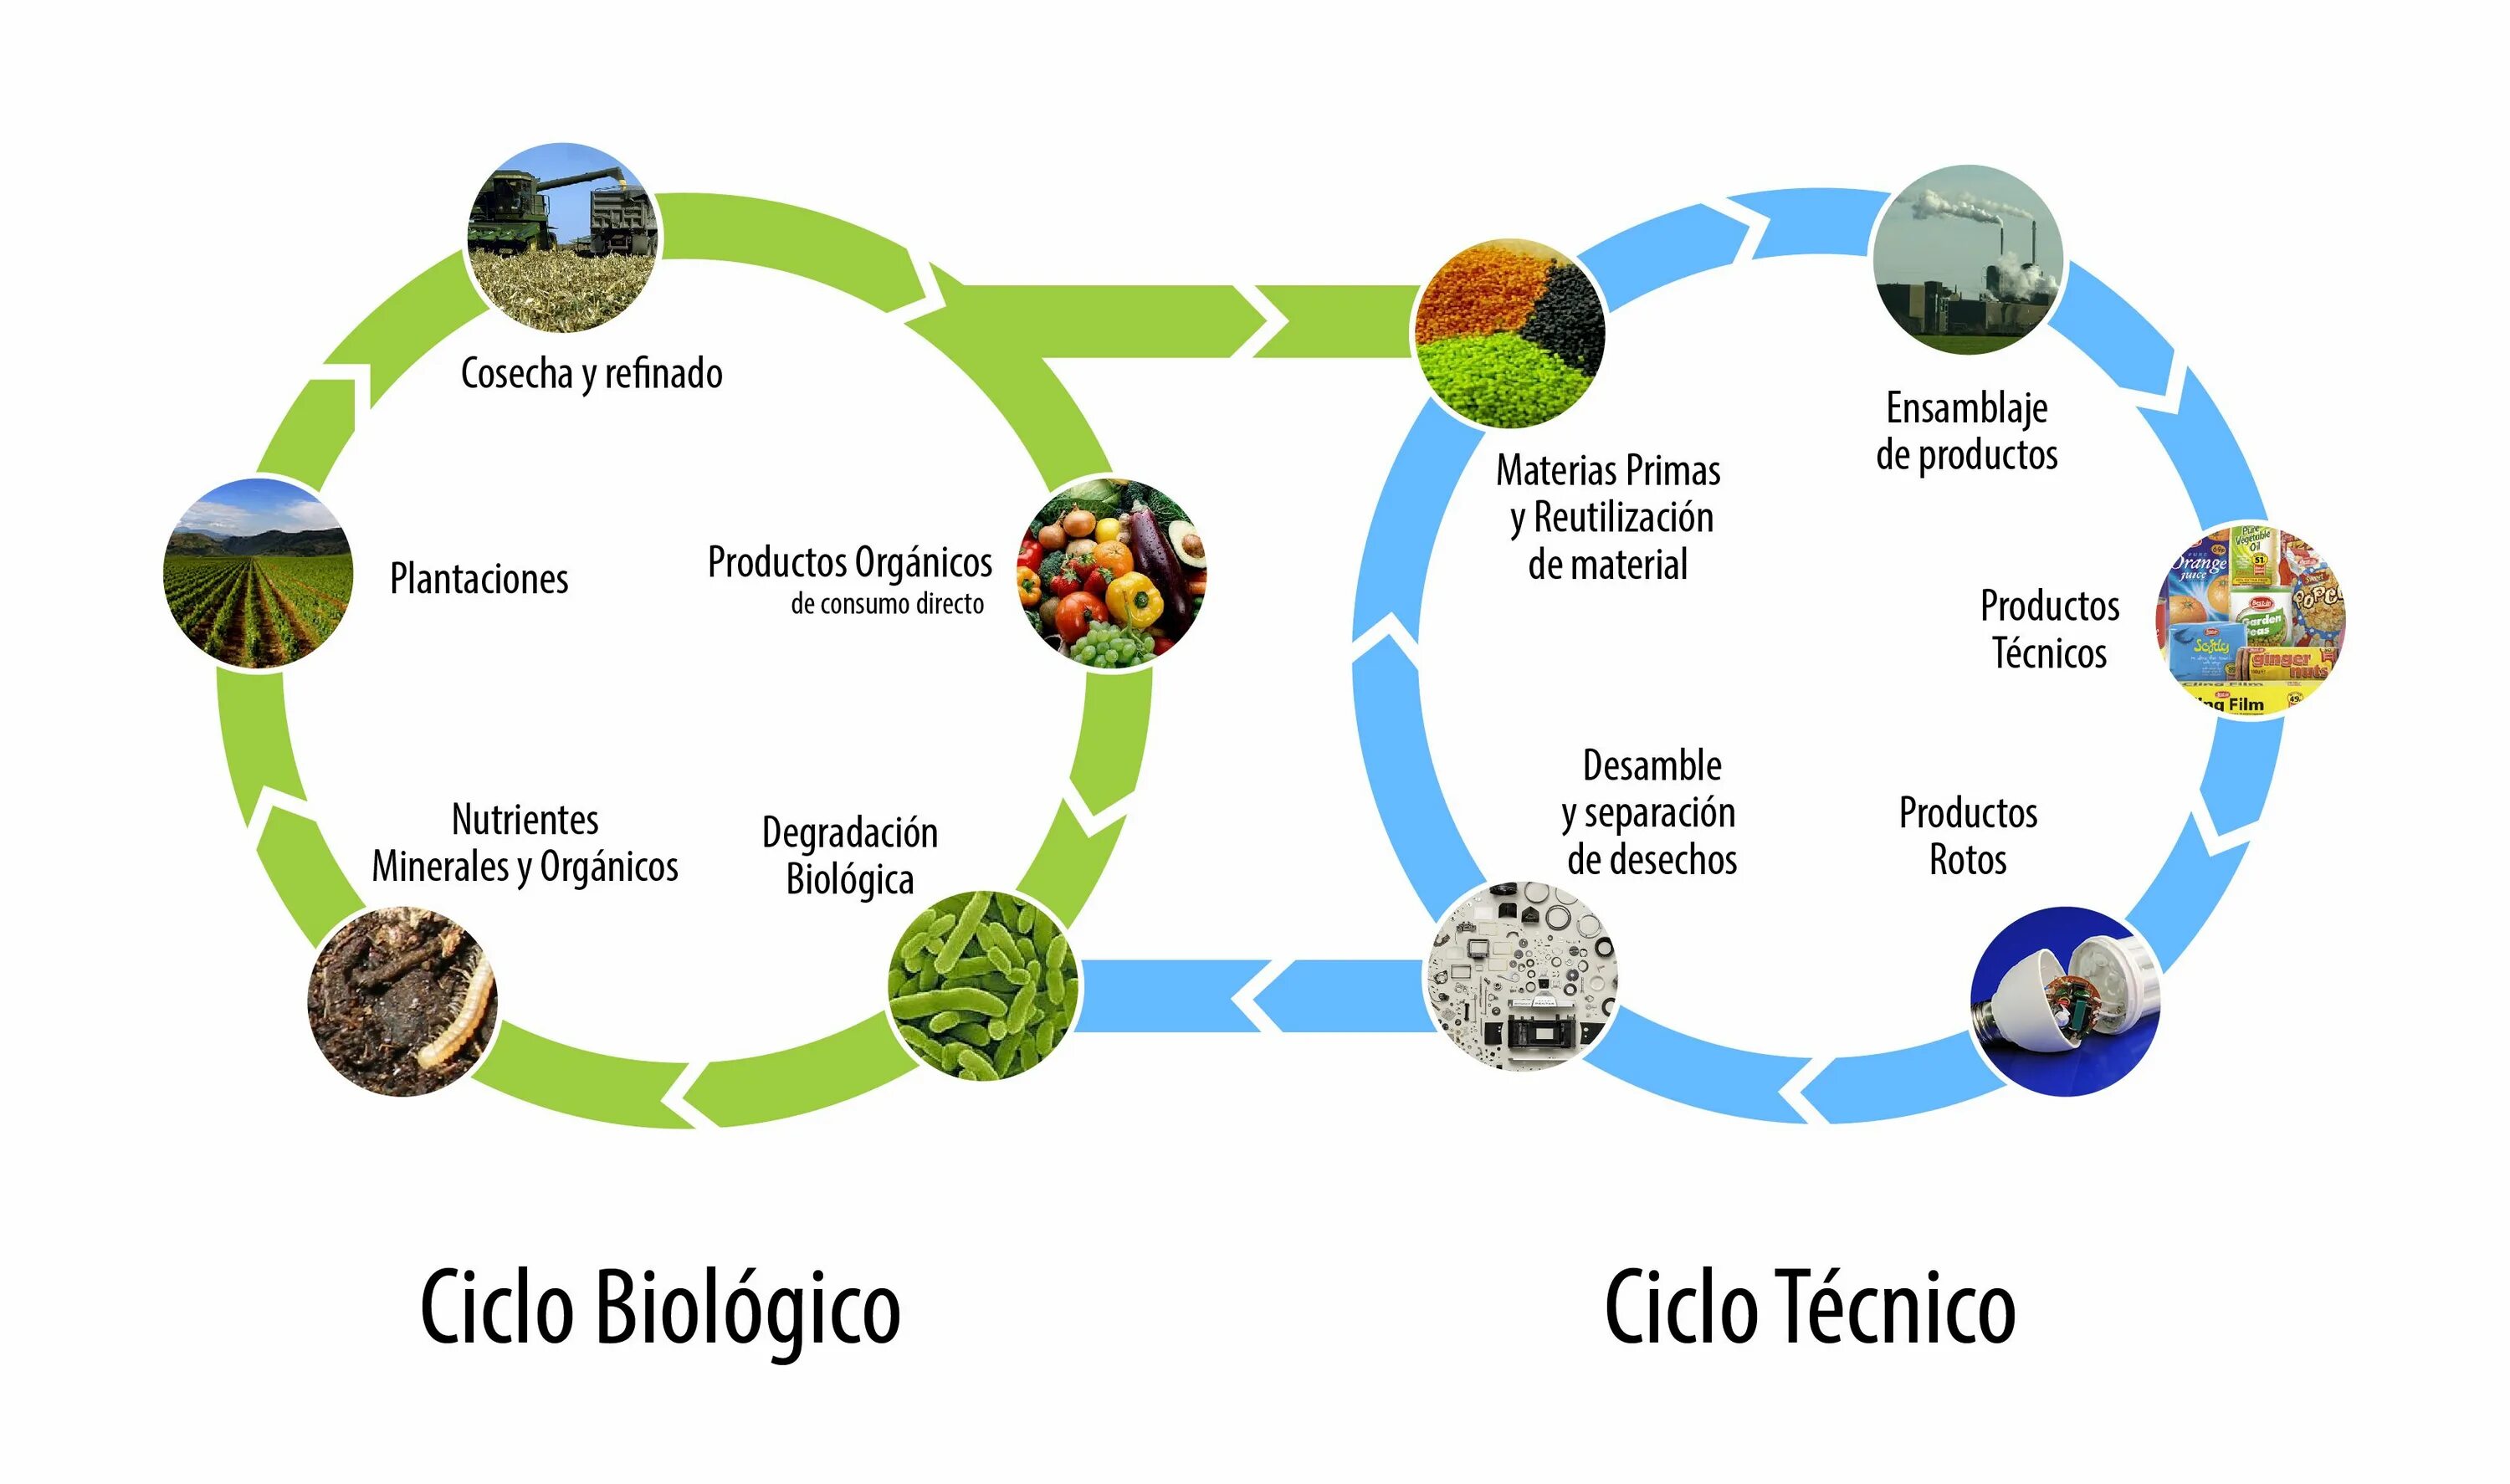 Biological Cycle. Cycle of waste. Biological resources. From waste to resources. Different resources